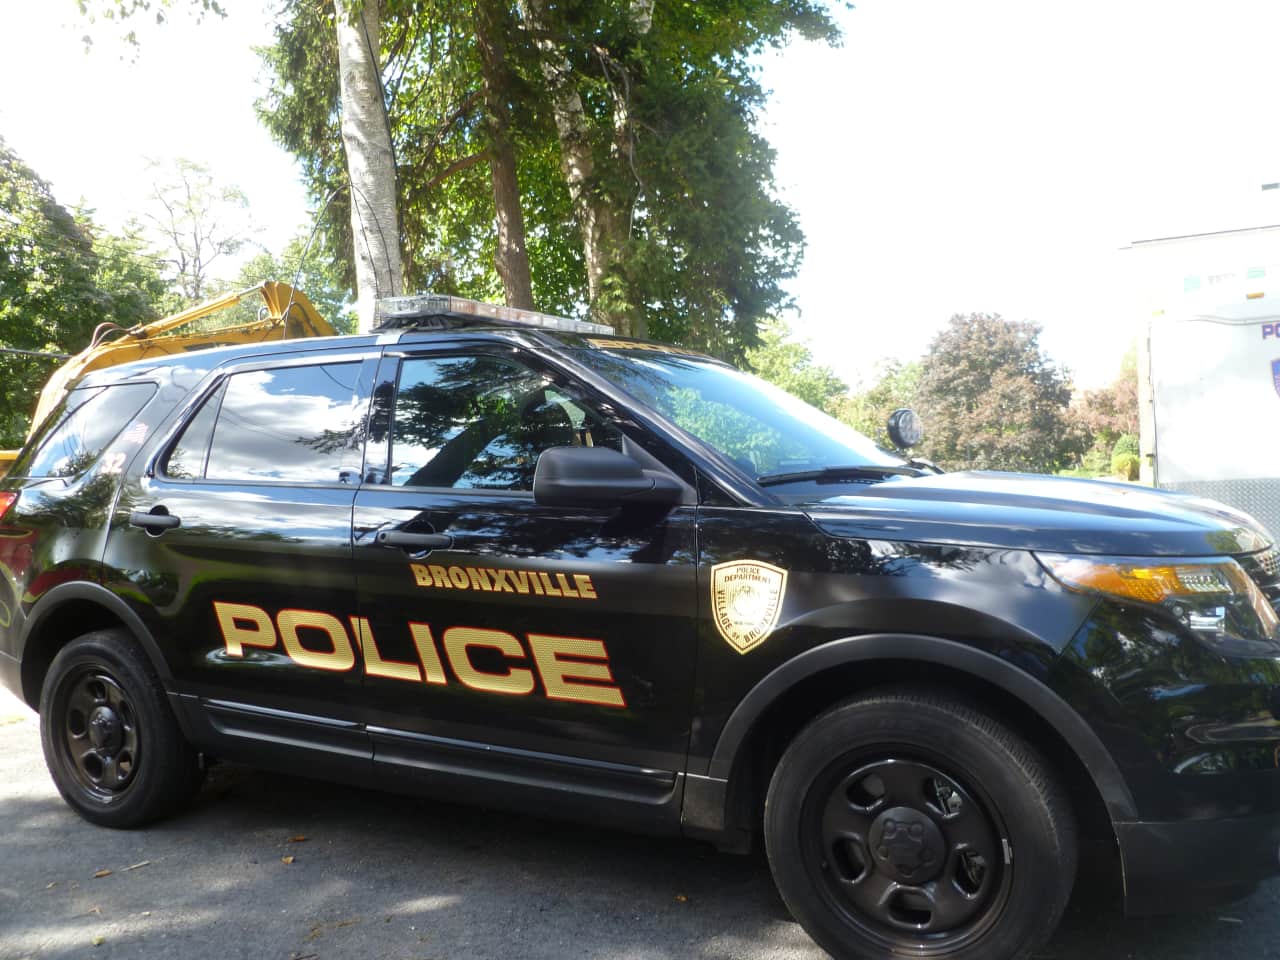 Bronxville police charged a 20-year-old with unlawful possession of marijuana.